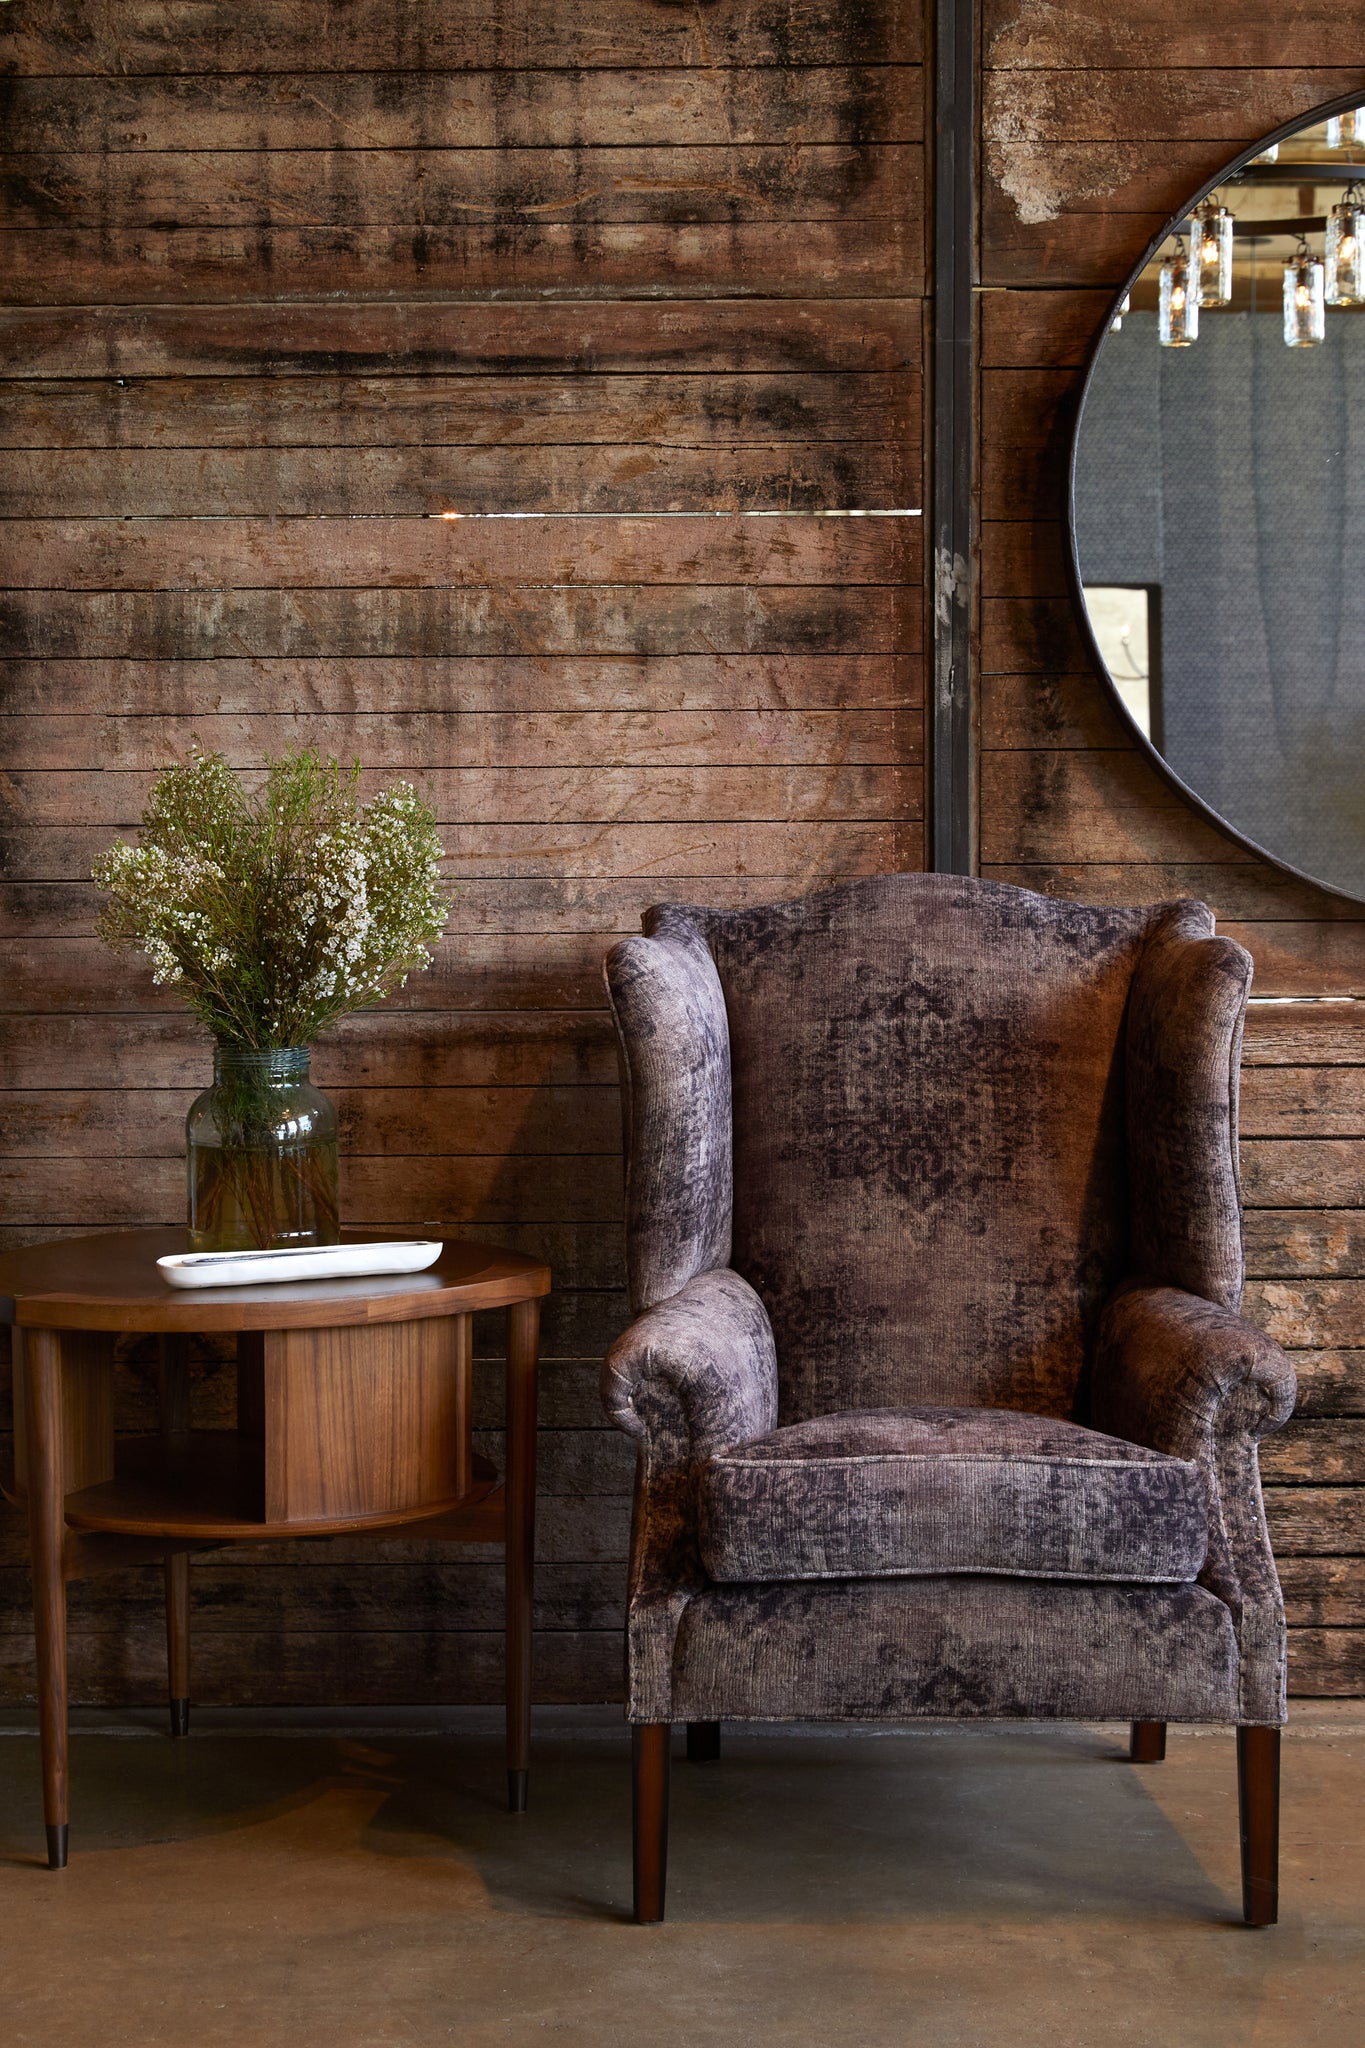  Thorn Tail chair in Tabriz Peppercorn next to a wood side table. In the background is a wood wall with a mirror hanging. Photographed in Tabriz Peppercorn. 